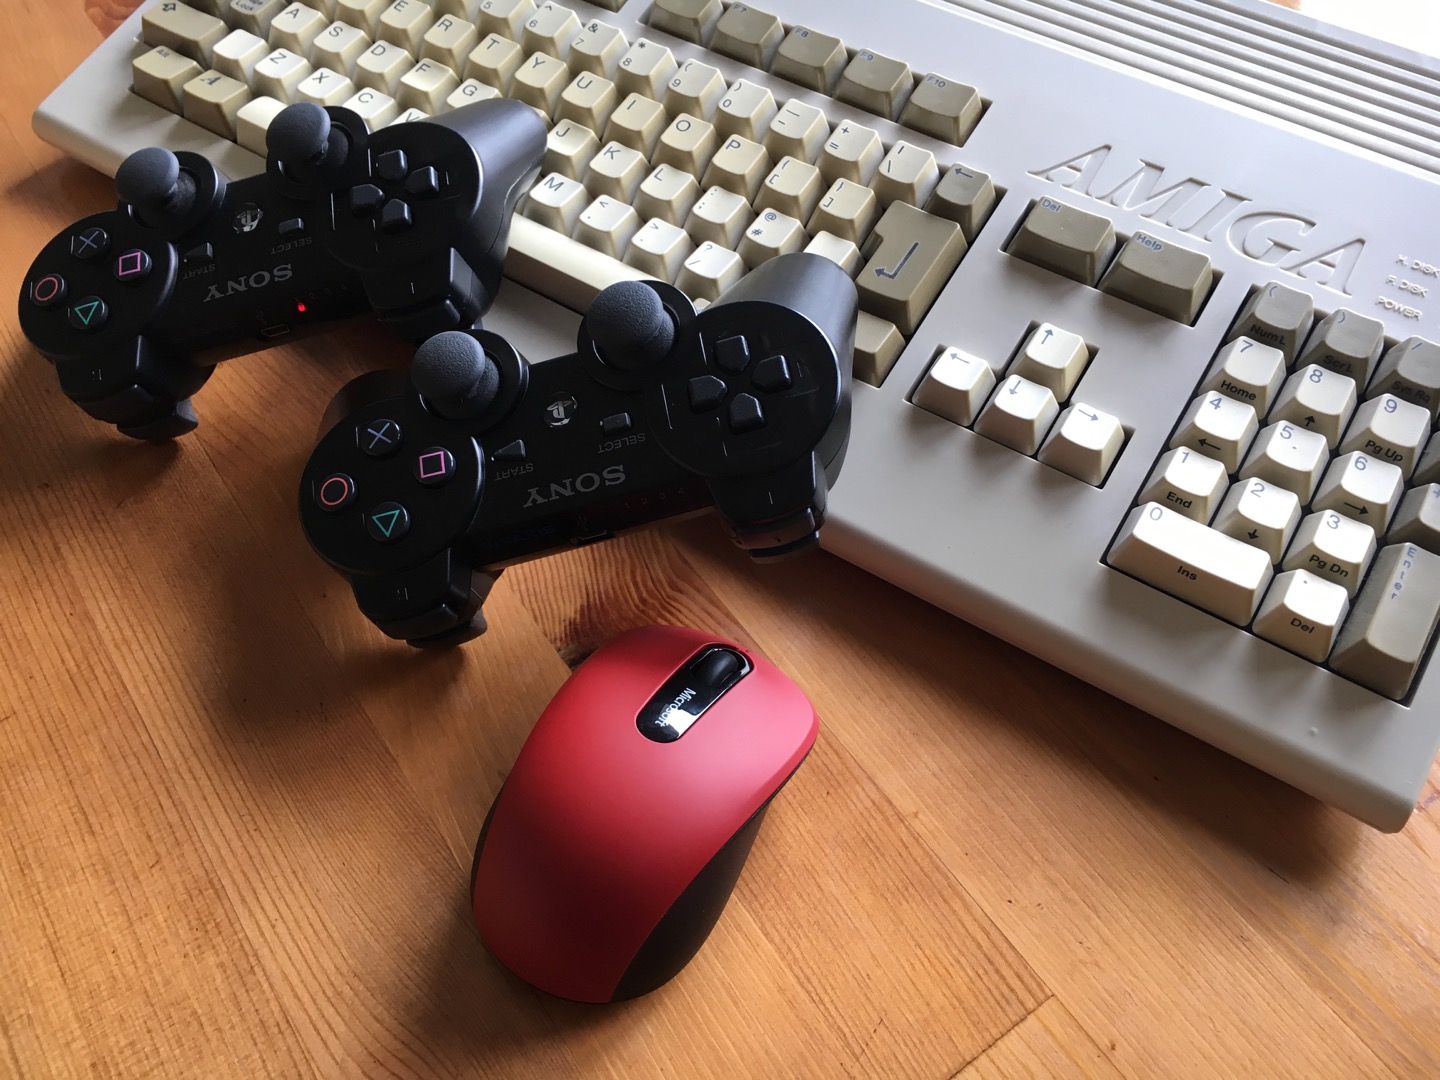 Using wireless Bluetooth gamepads and mice on an Amiga or C64